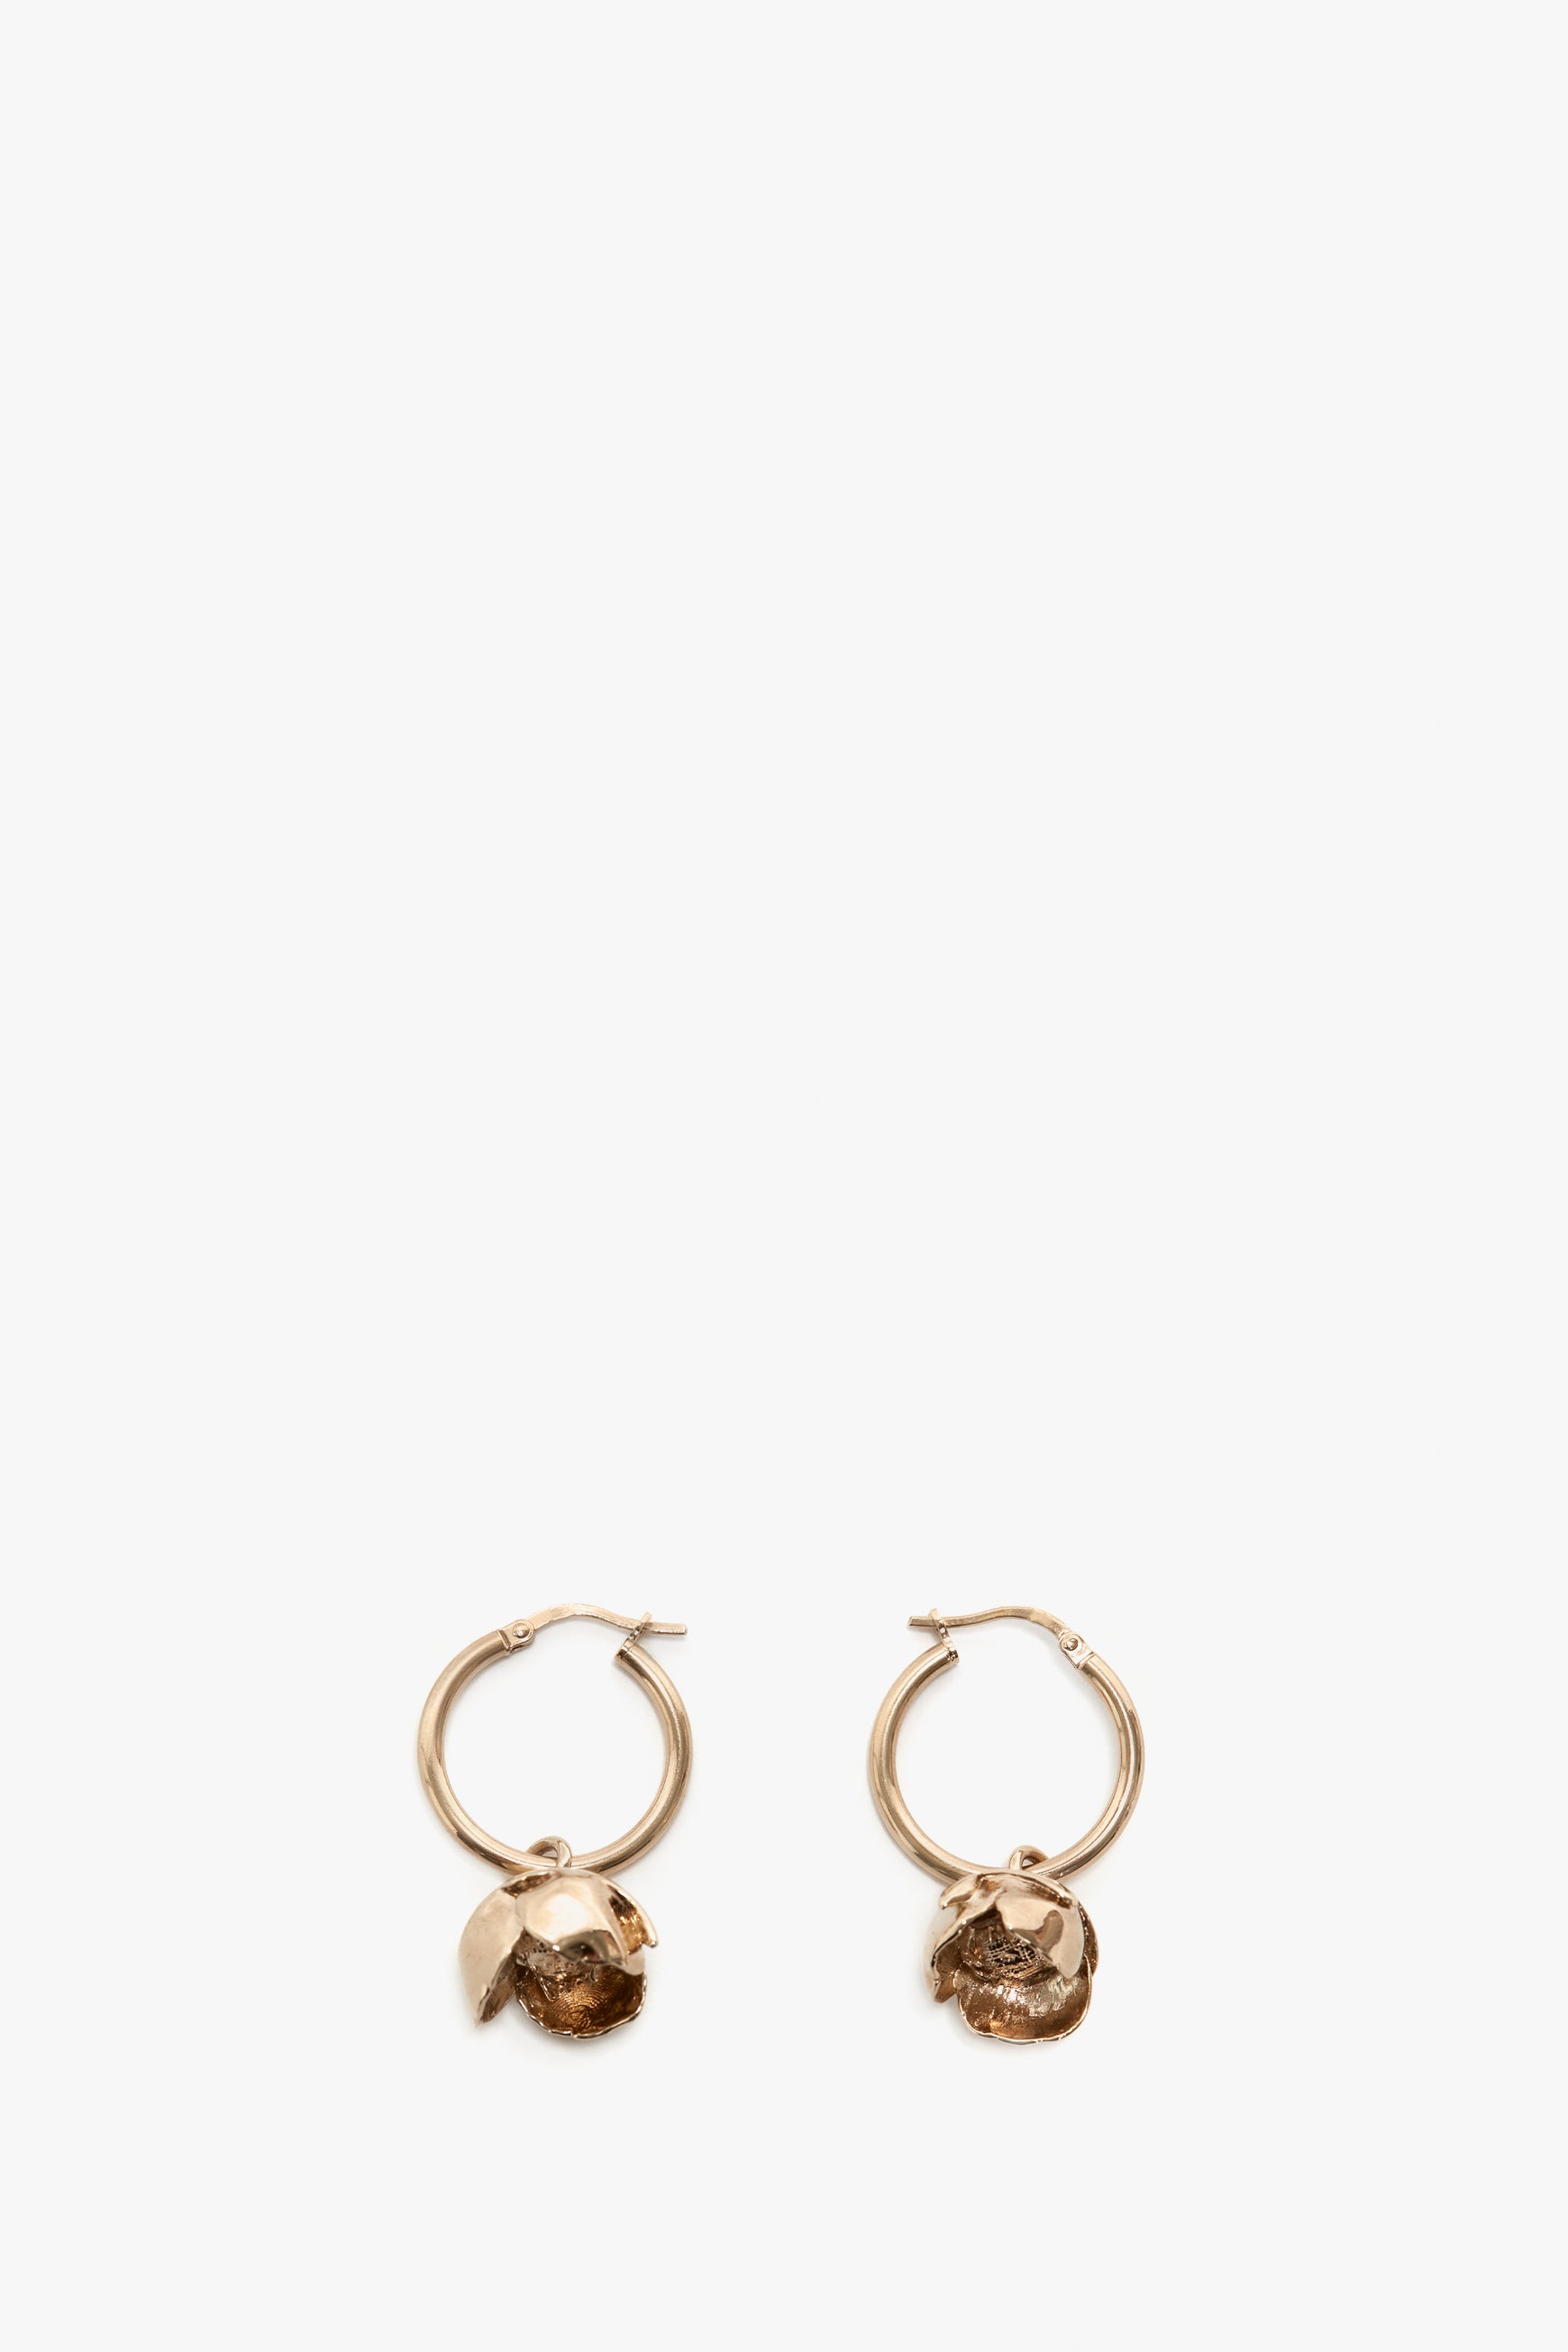 A pair of Exclusive Camellia Flower Hoop Earrings In Gold by Victoria Beckham with small decorative lion heads, isolated on a white background.